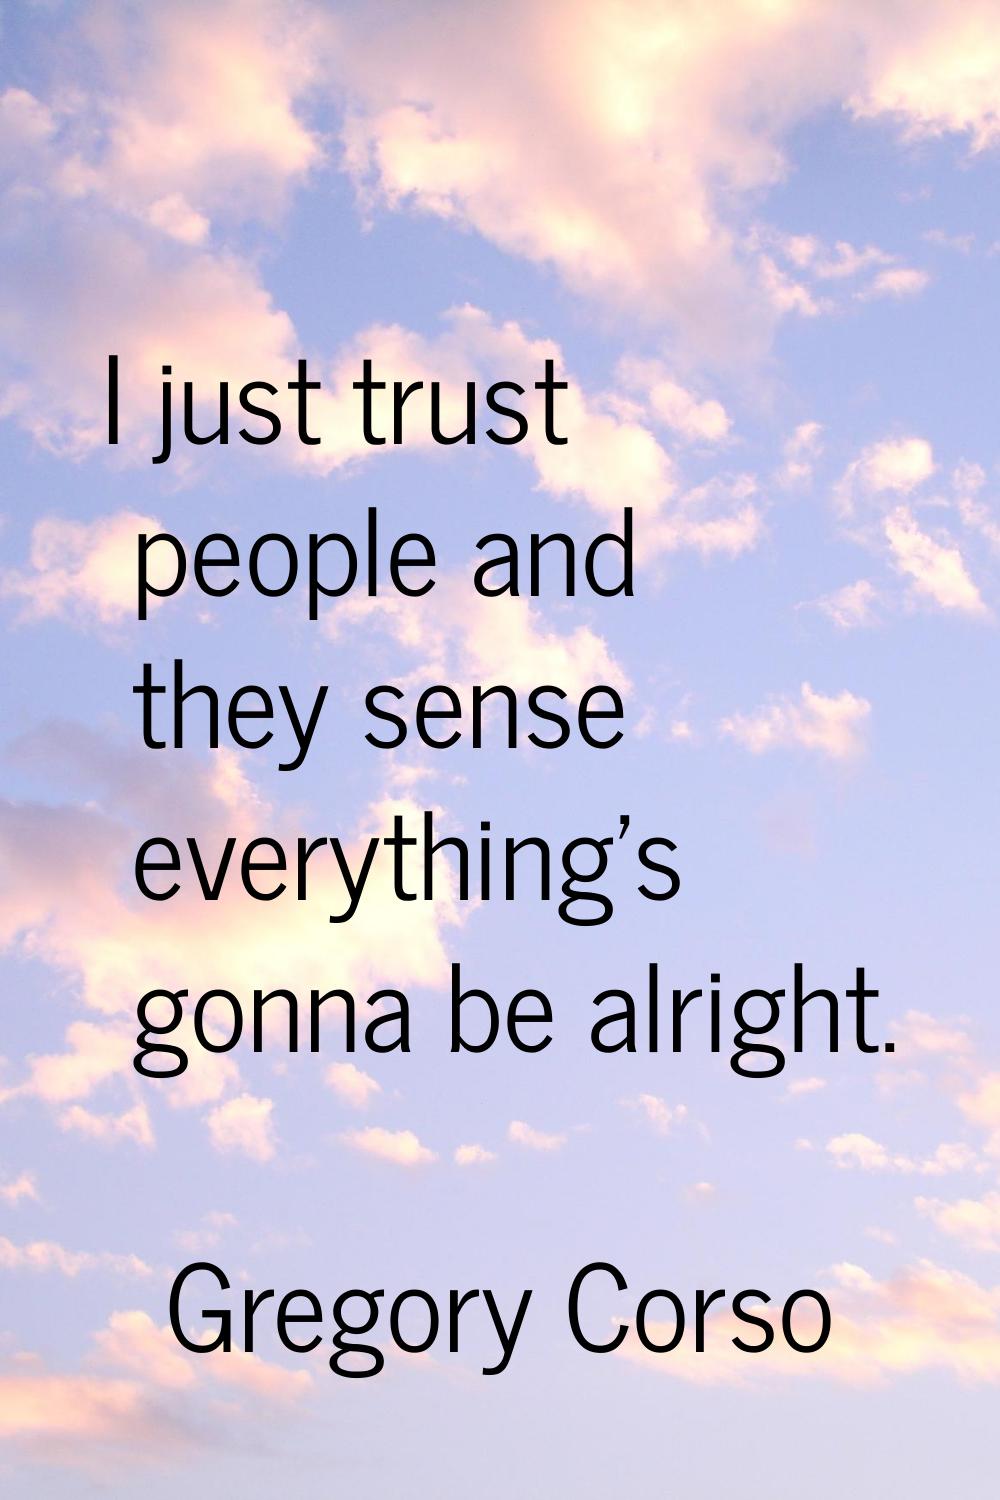 I just trust people and they sense everything's gonna be alright.